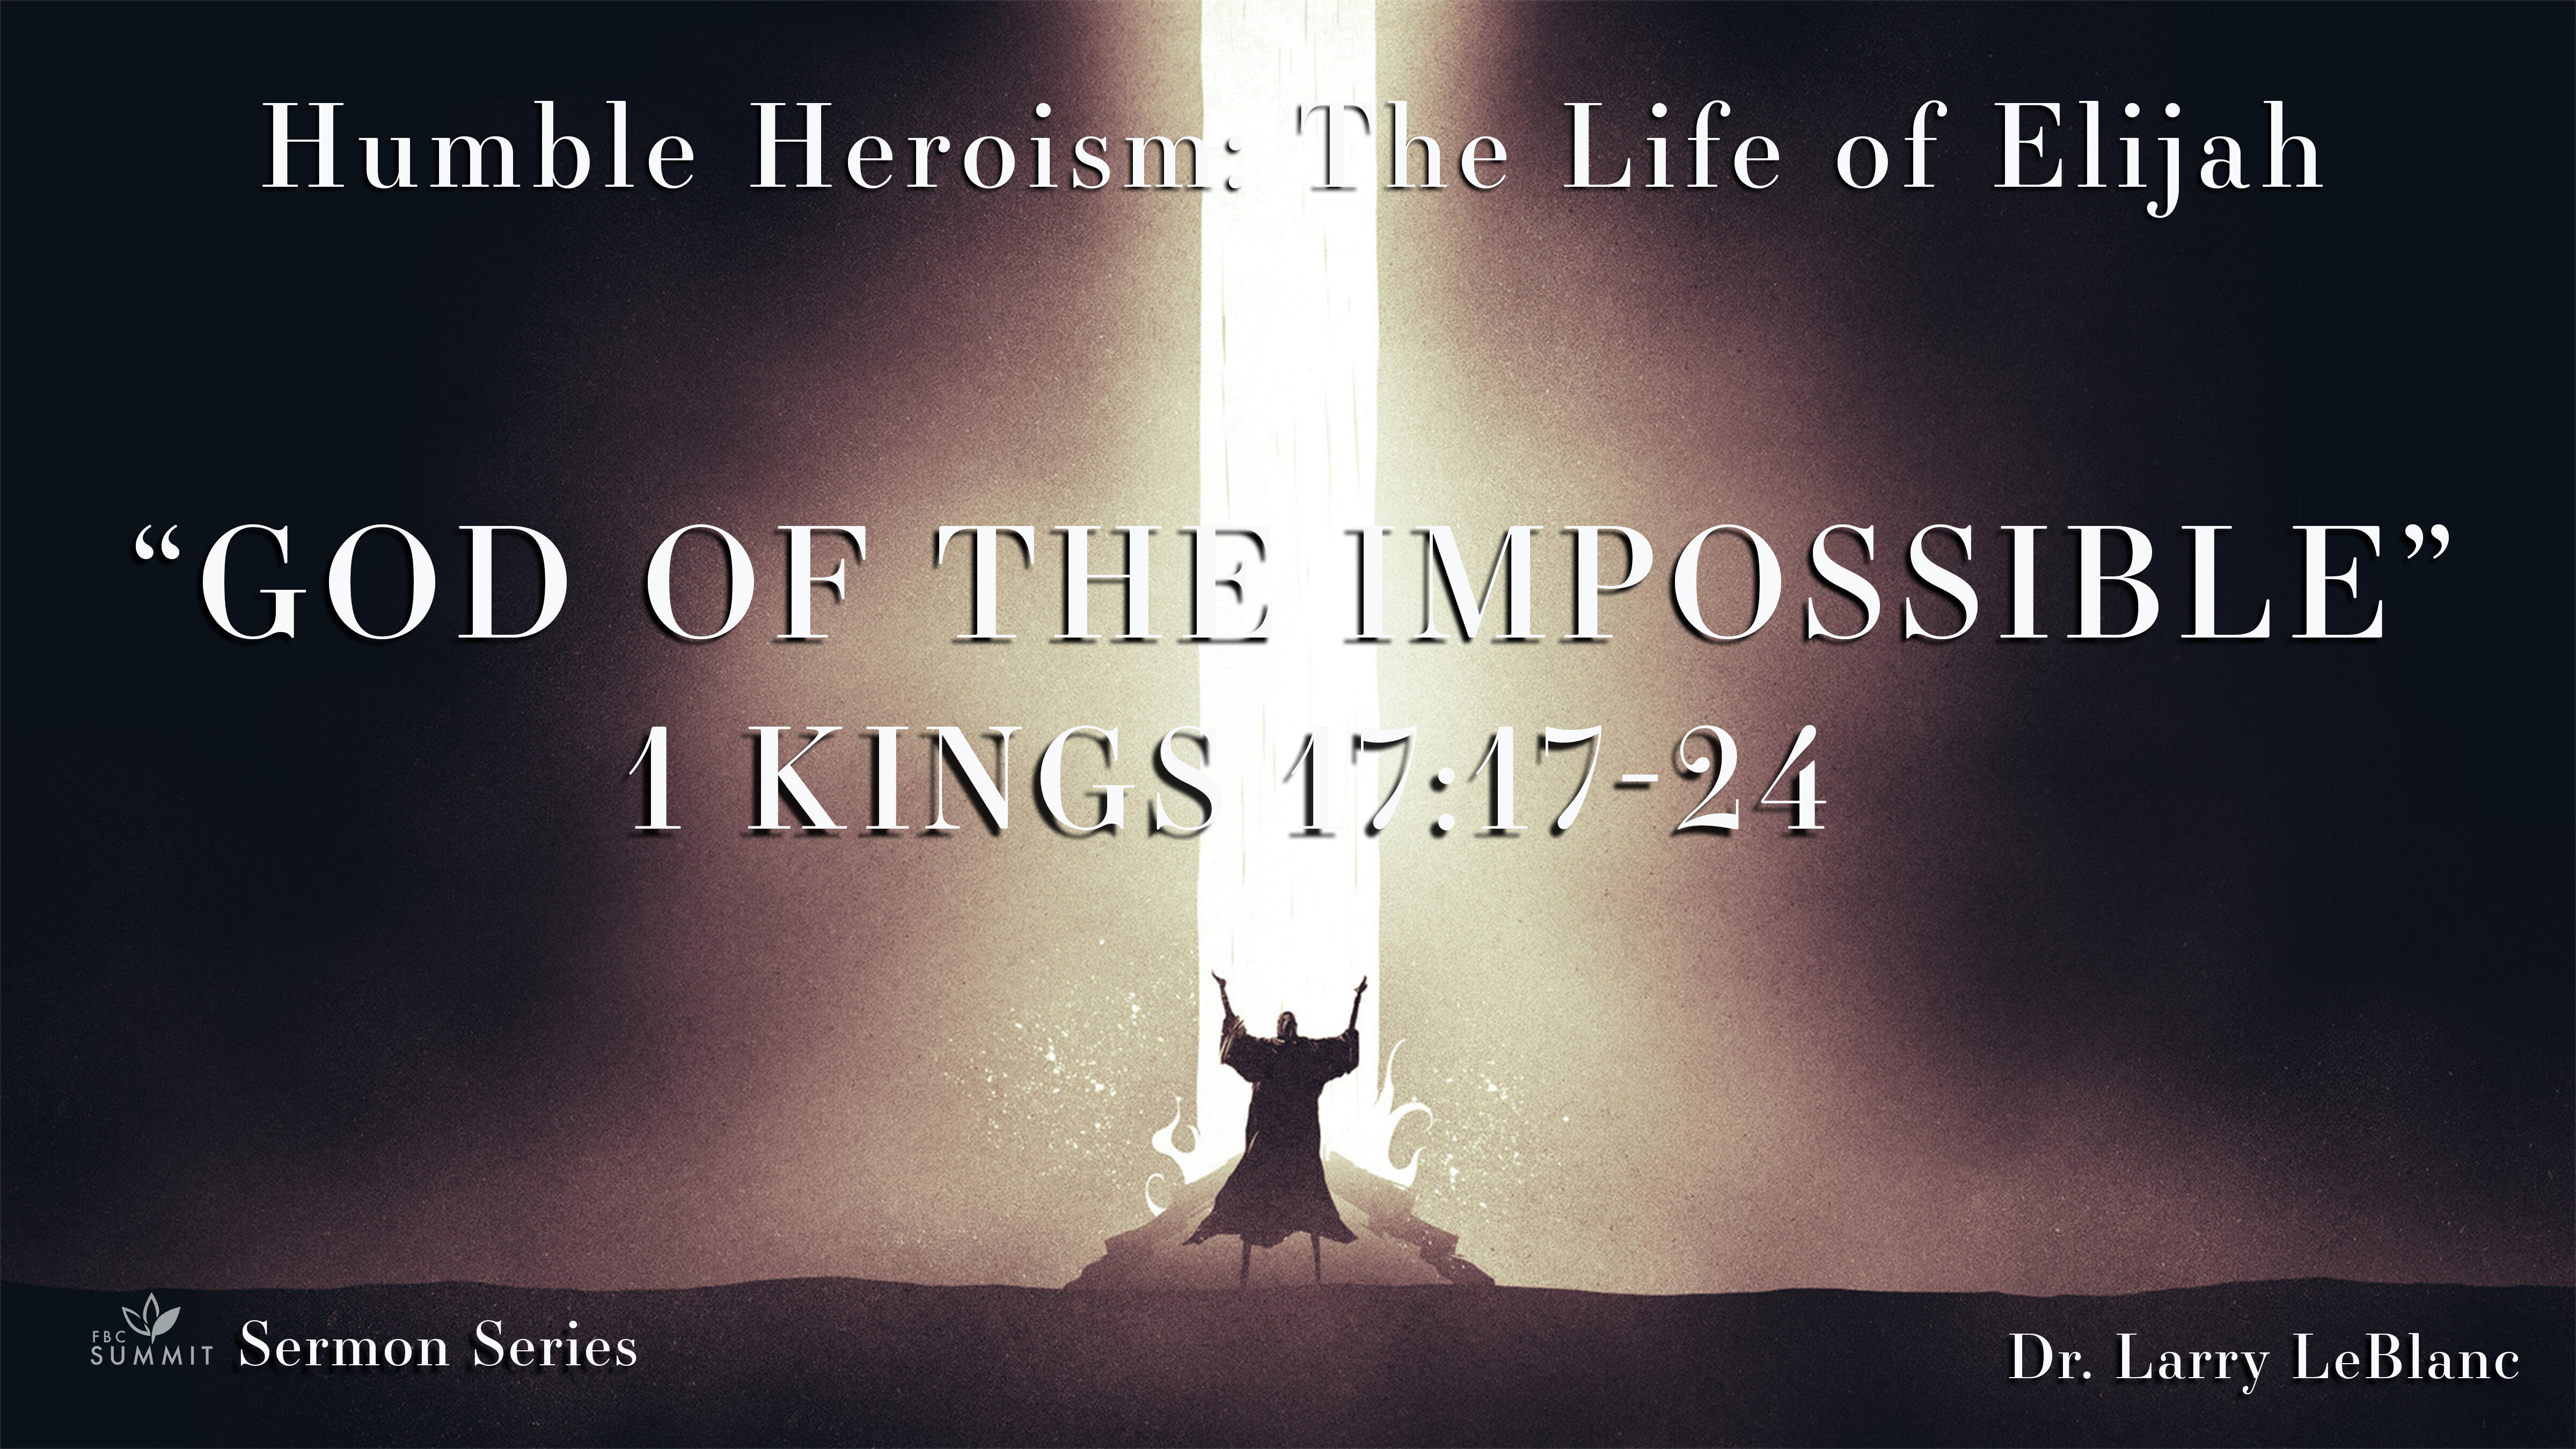 "God of the Impossible" 1 Kings 17:17-24 // Dr. Larry LeBlanc